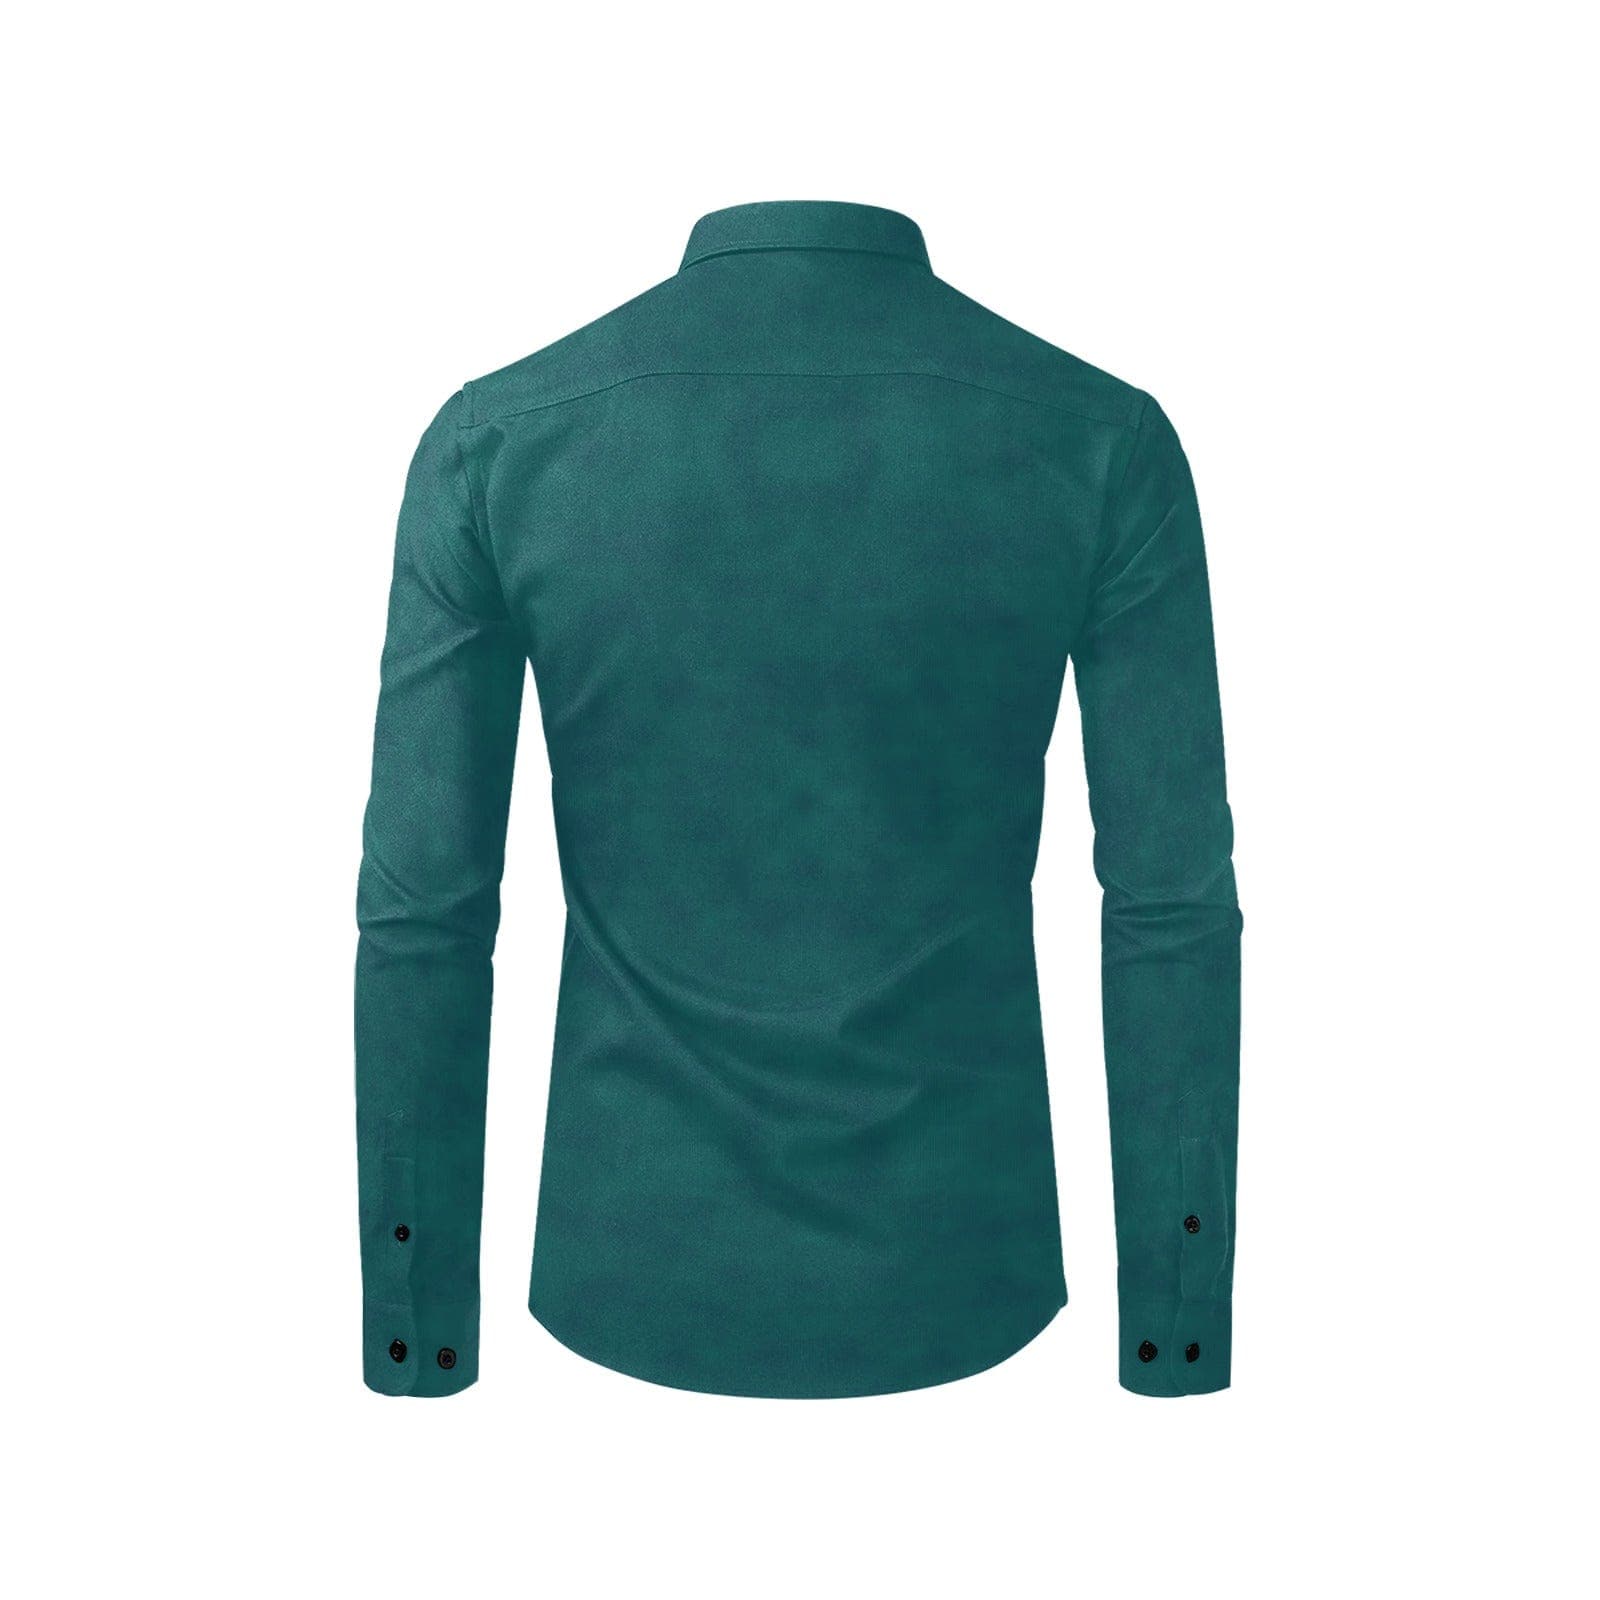 Scandinavian Forrest Green Shirt with Mythical Pattern for Men Long Sleeve Shirt (Without Pocket)